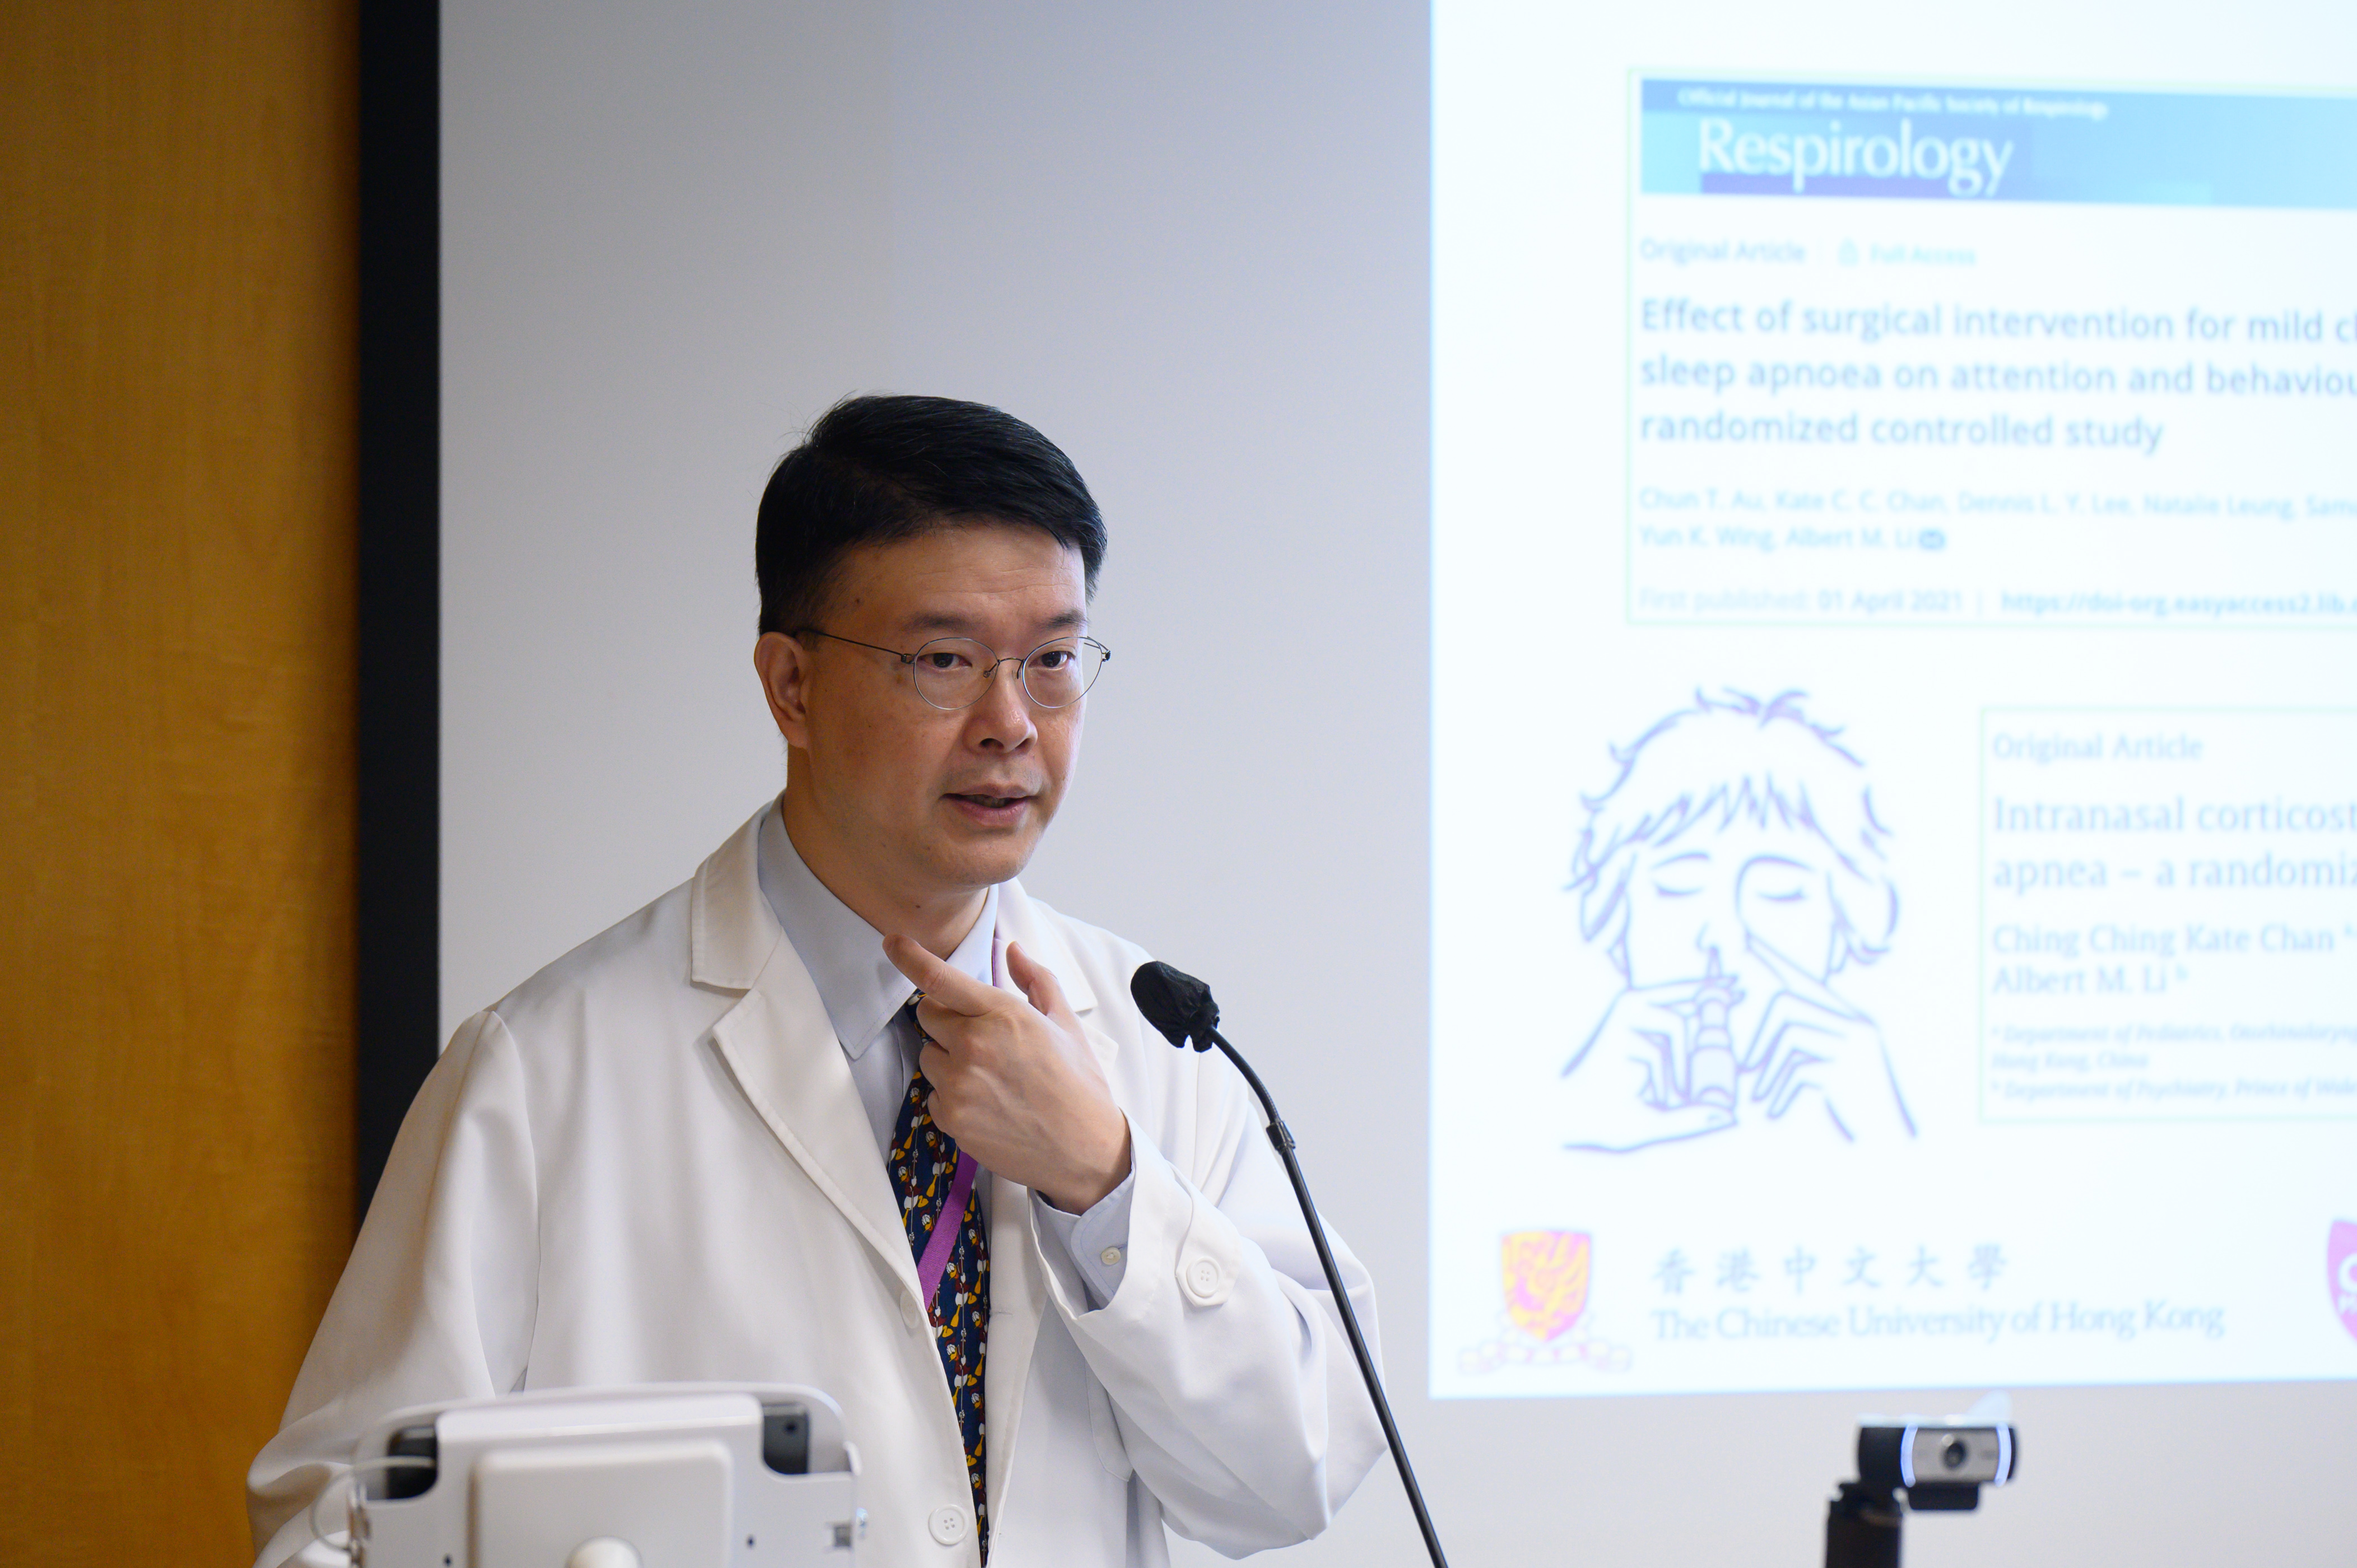 Professor Albert Li reminds parents to balance the benefits and risks of surgical treatment for children with severe OSA. Postoperative lifestyle changes and weight control are equally important for managing the disease.